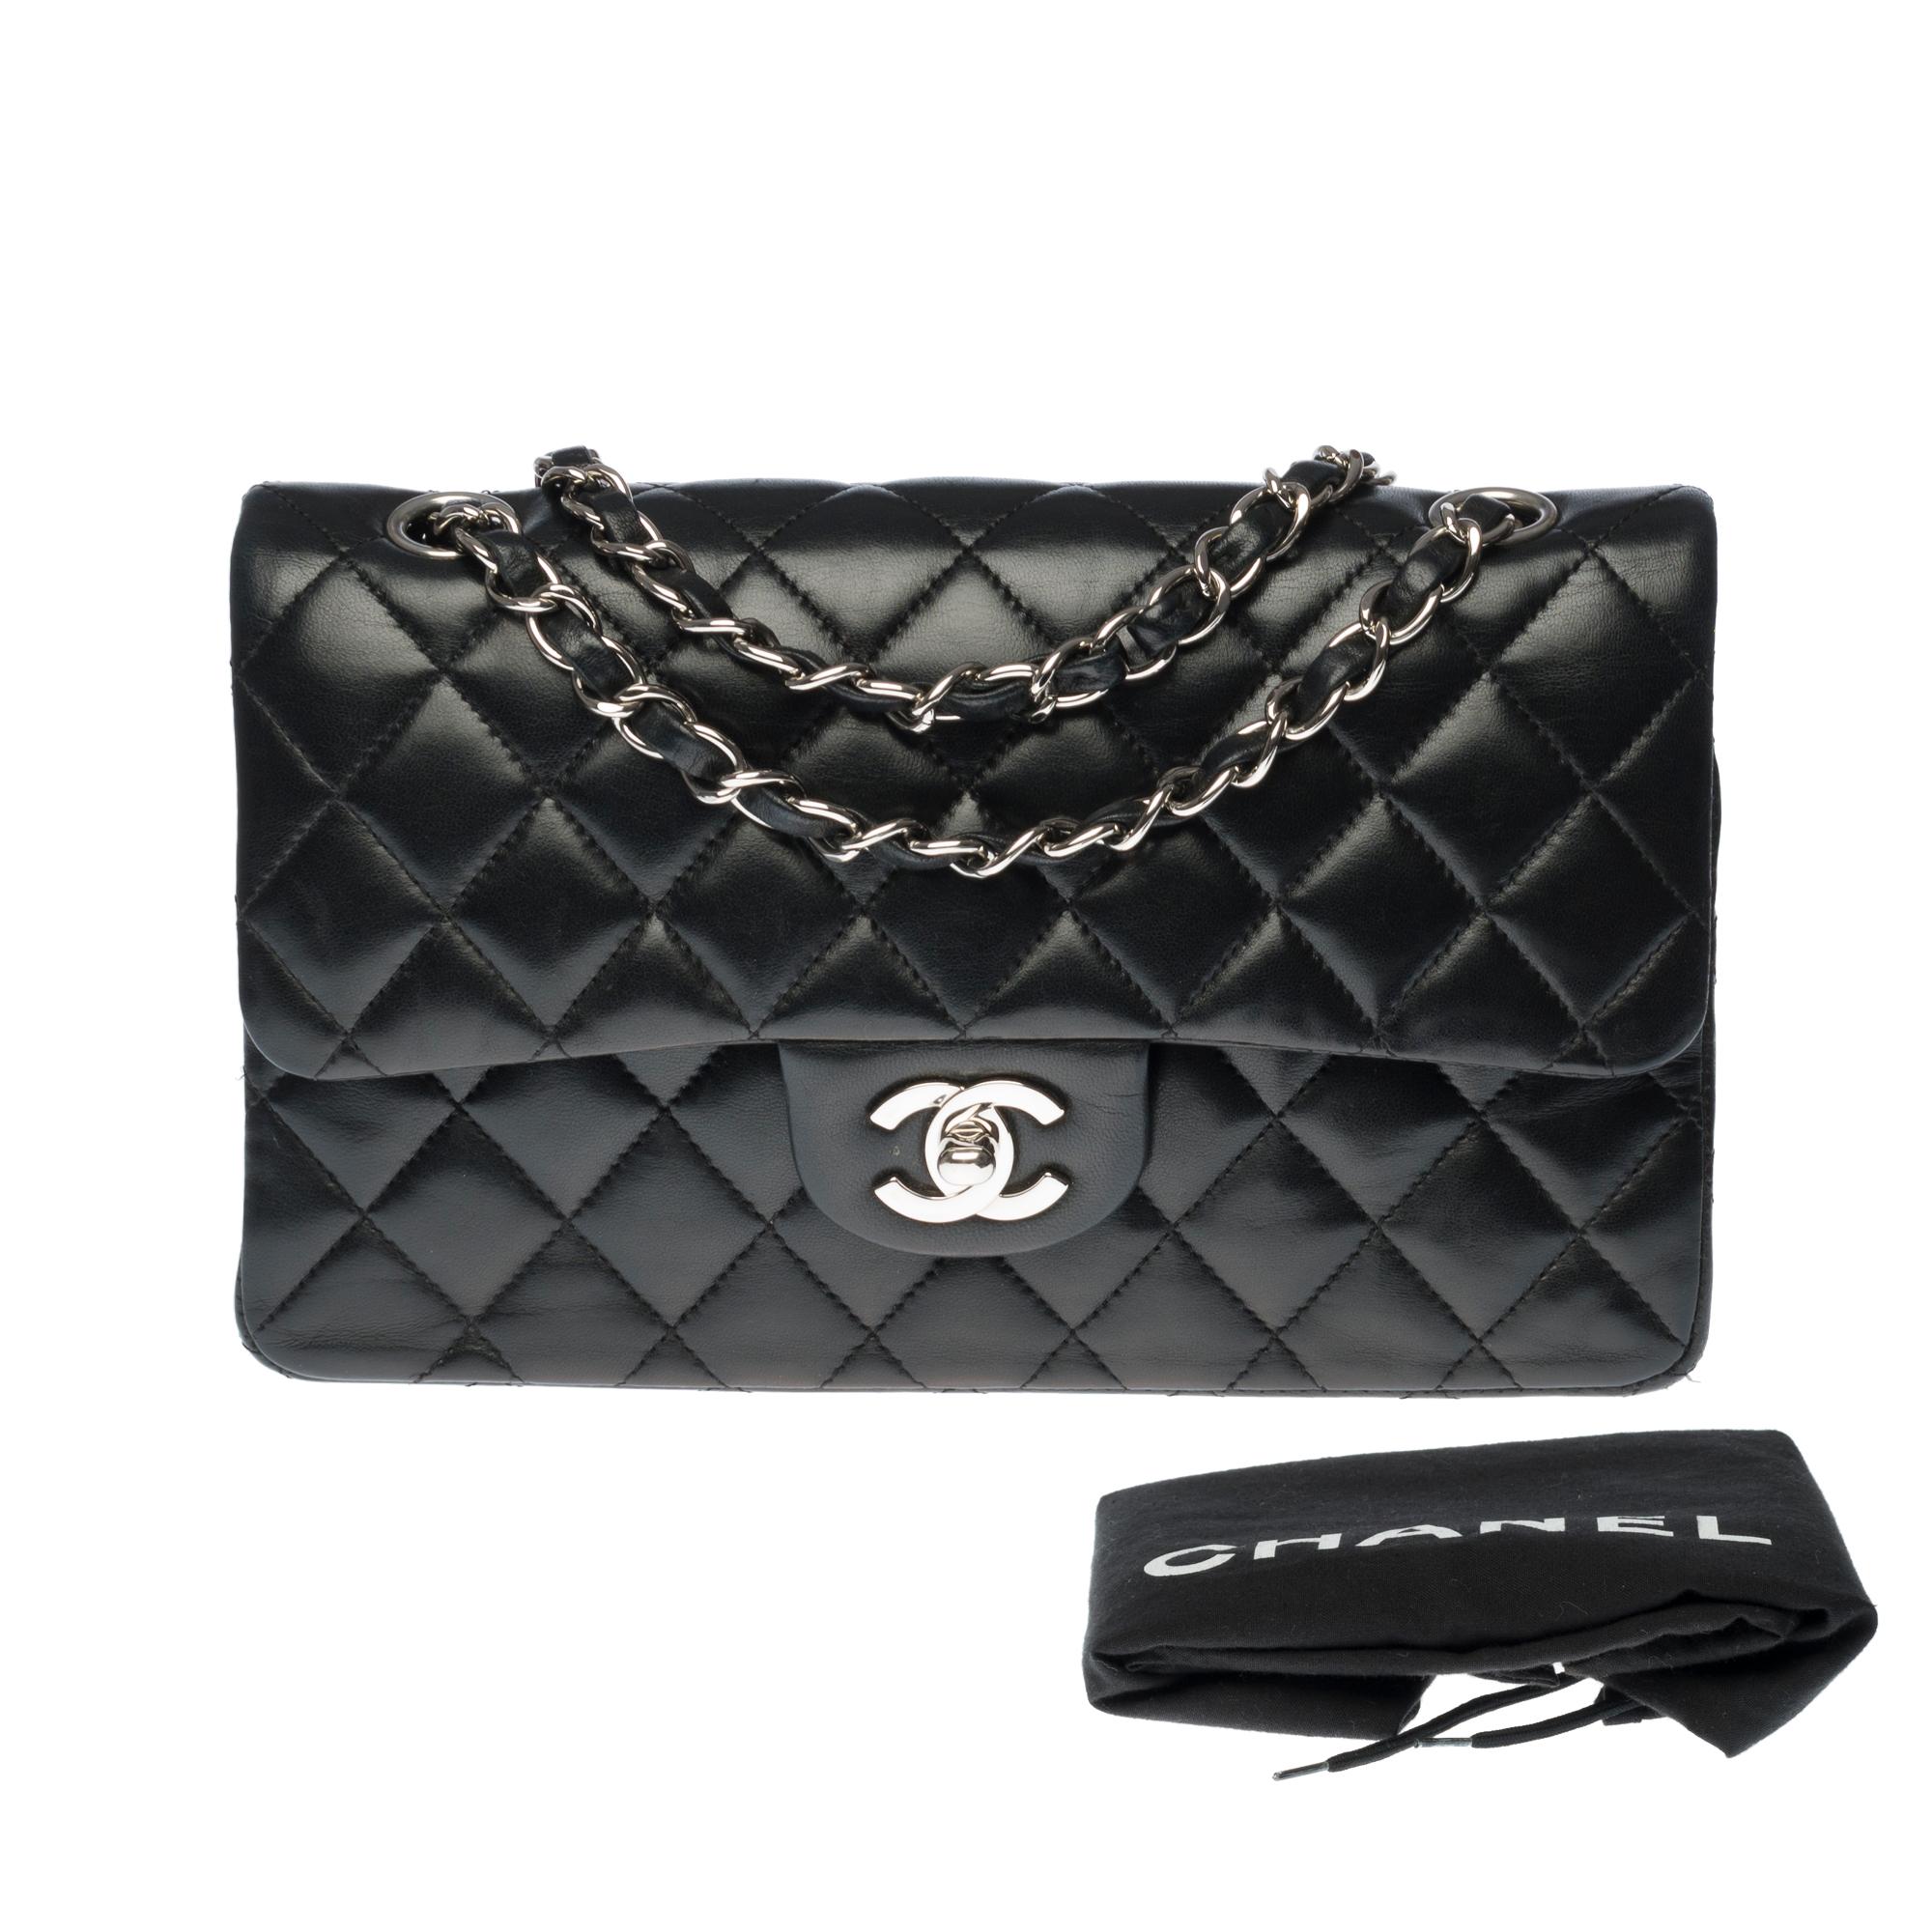 The Coveted Chanel Timeless 23cm Shoulder bag in black quilted lambskin, SHW 3